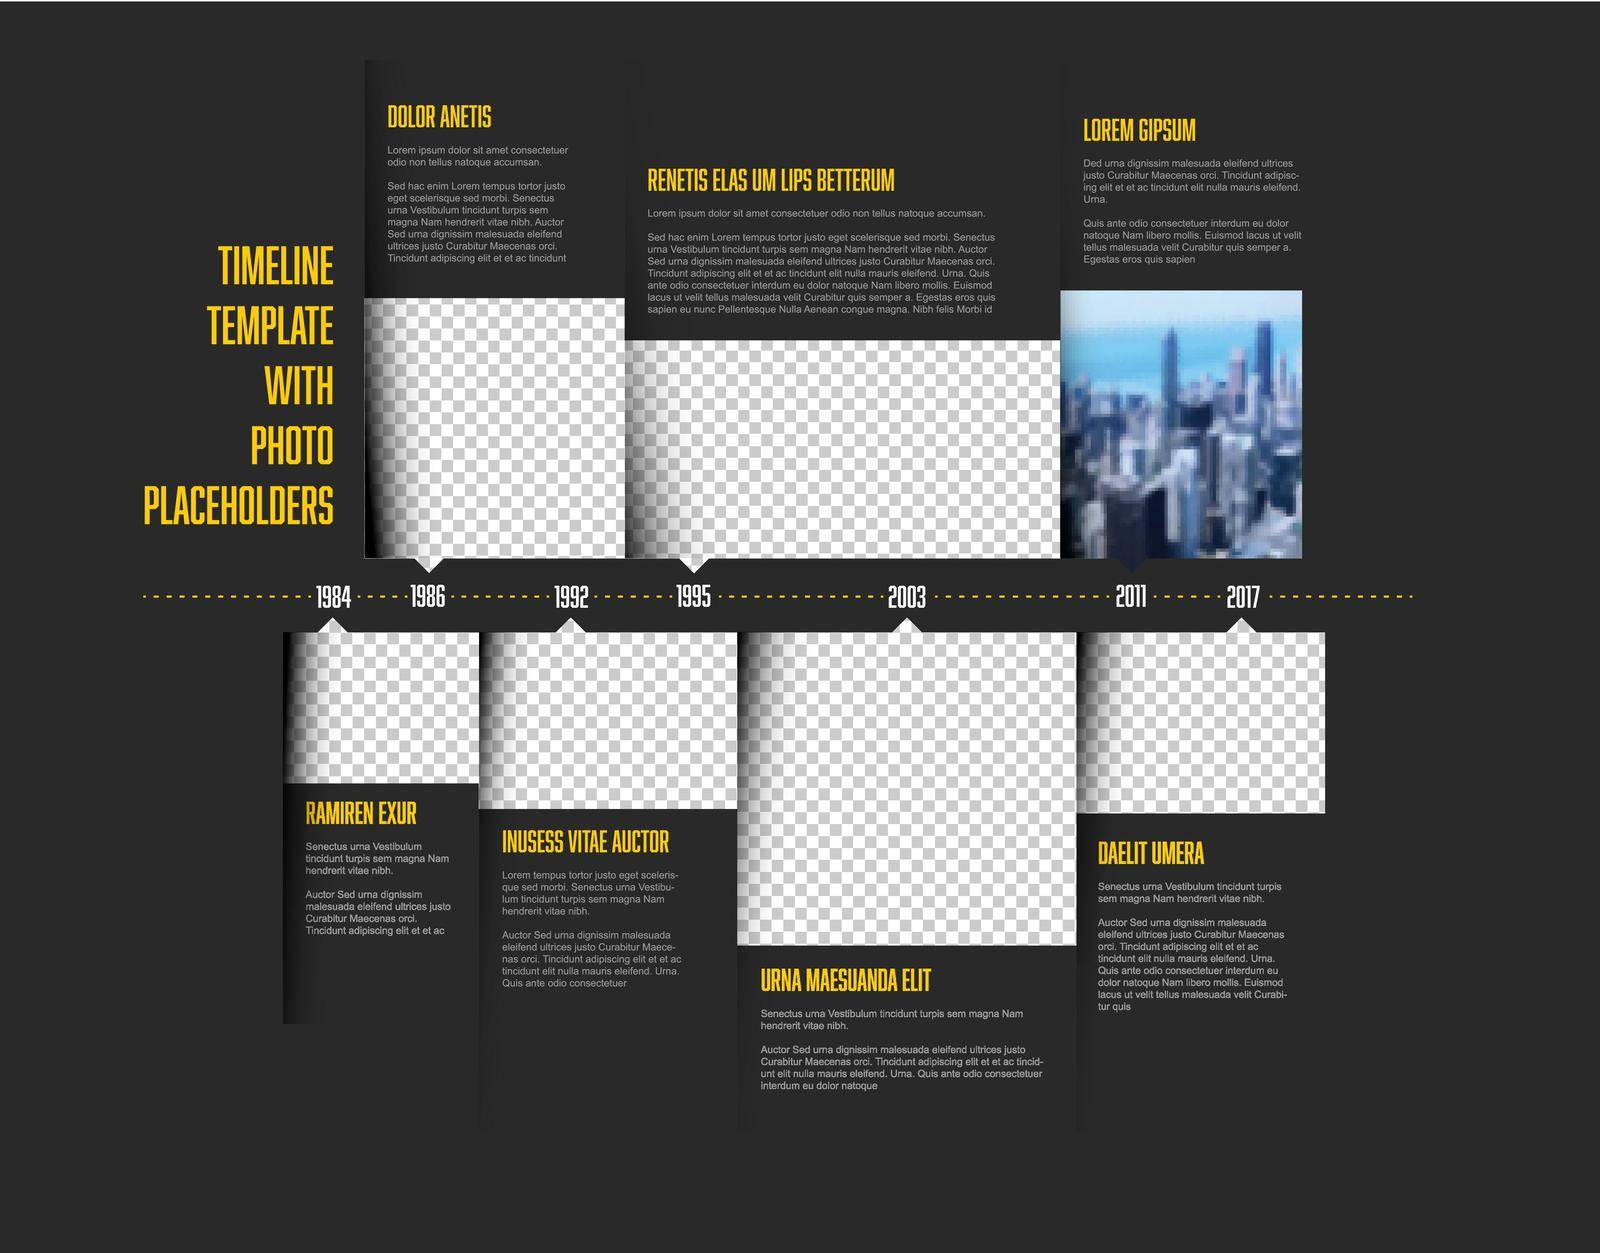 Simple infographic timeline template with photo placeholders by orson